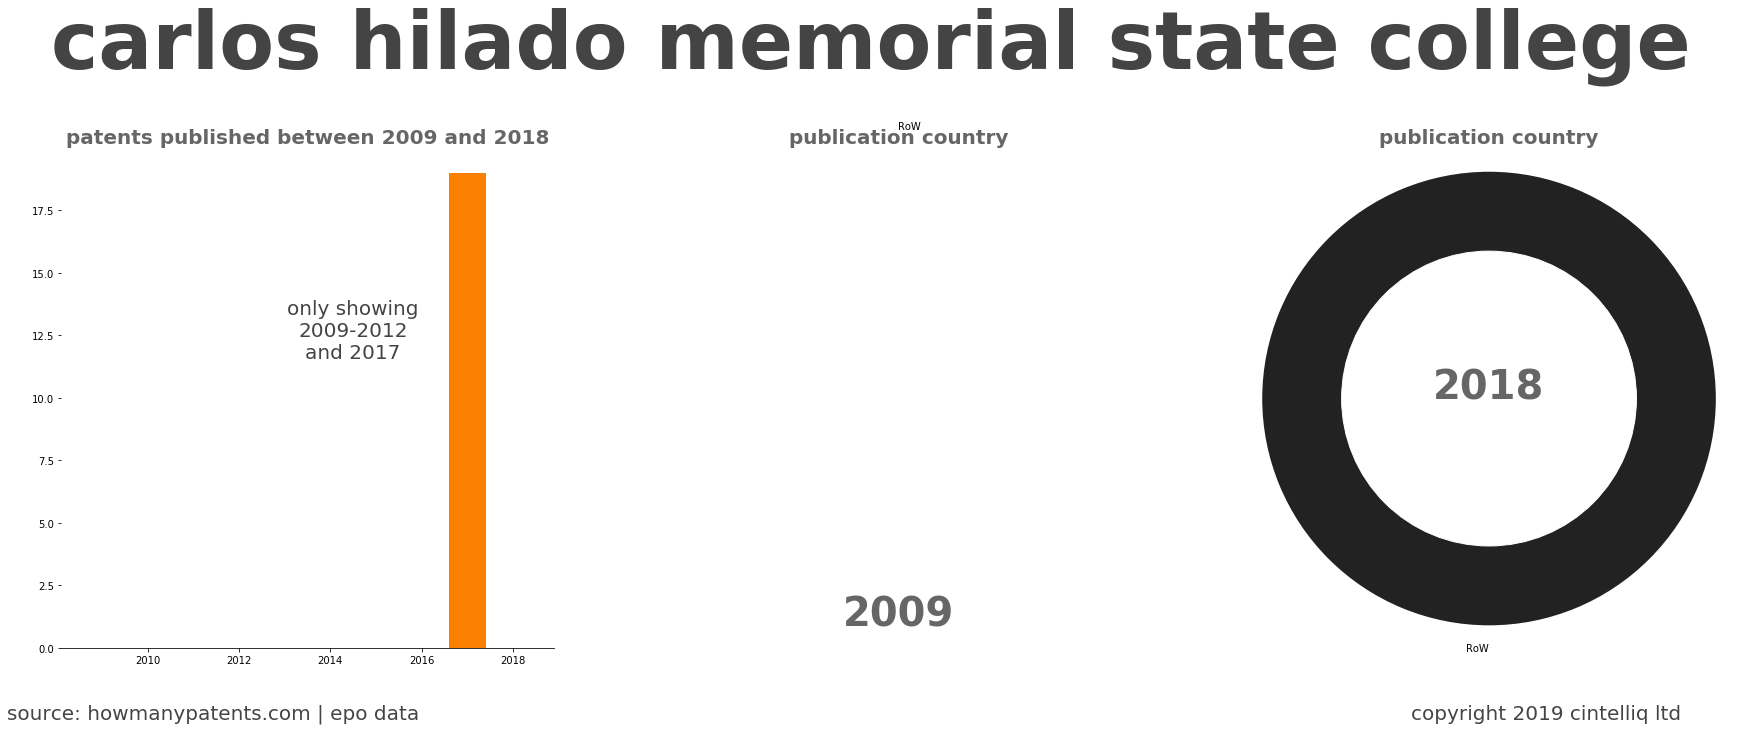 summary of patents for Carlos Hilado Memorial State College